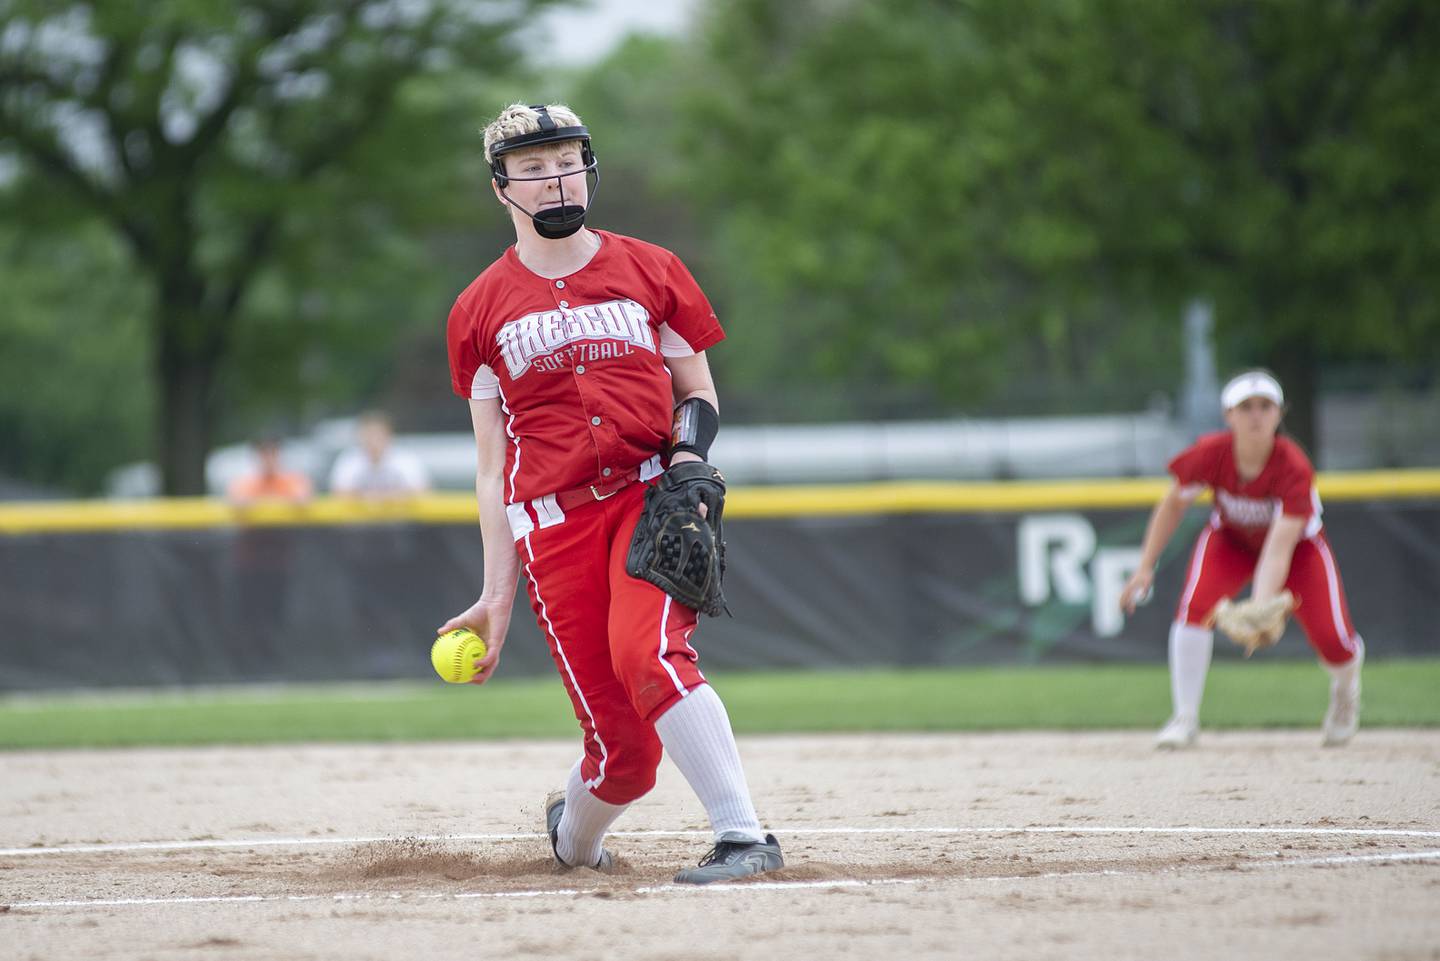 Oregon’s Lena Trampel fires a pitch in the first inning against Rock Falls Friday, May 20, 2022.